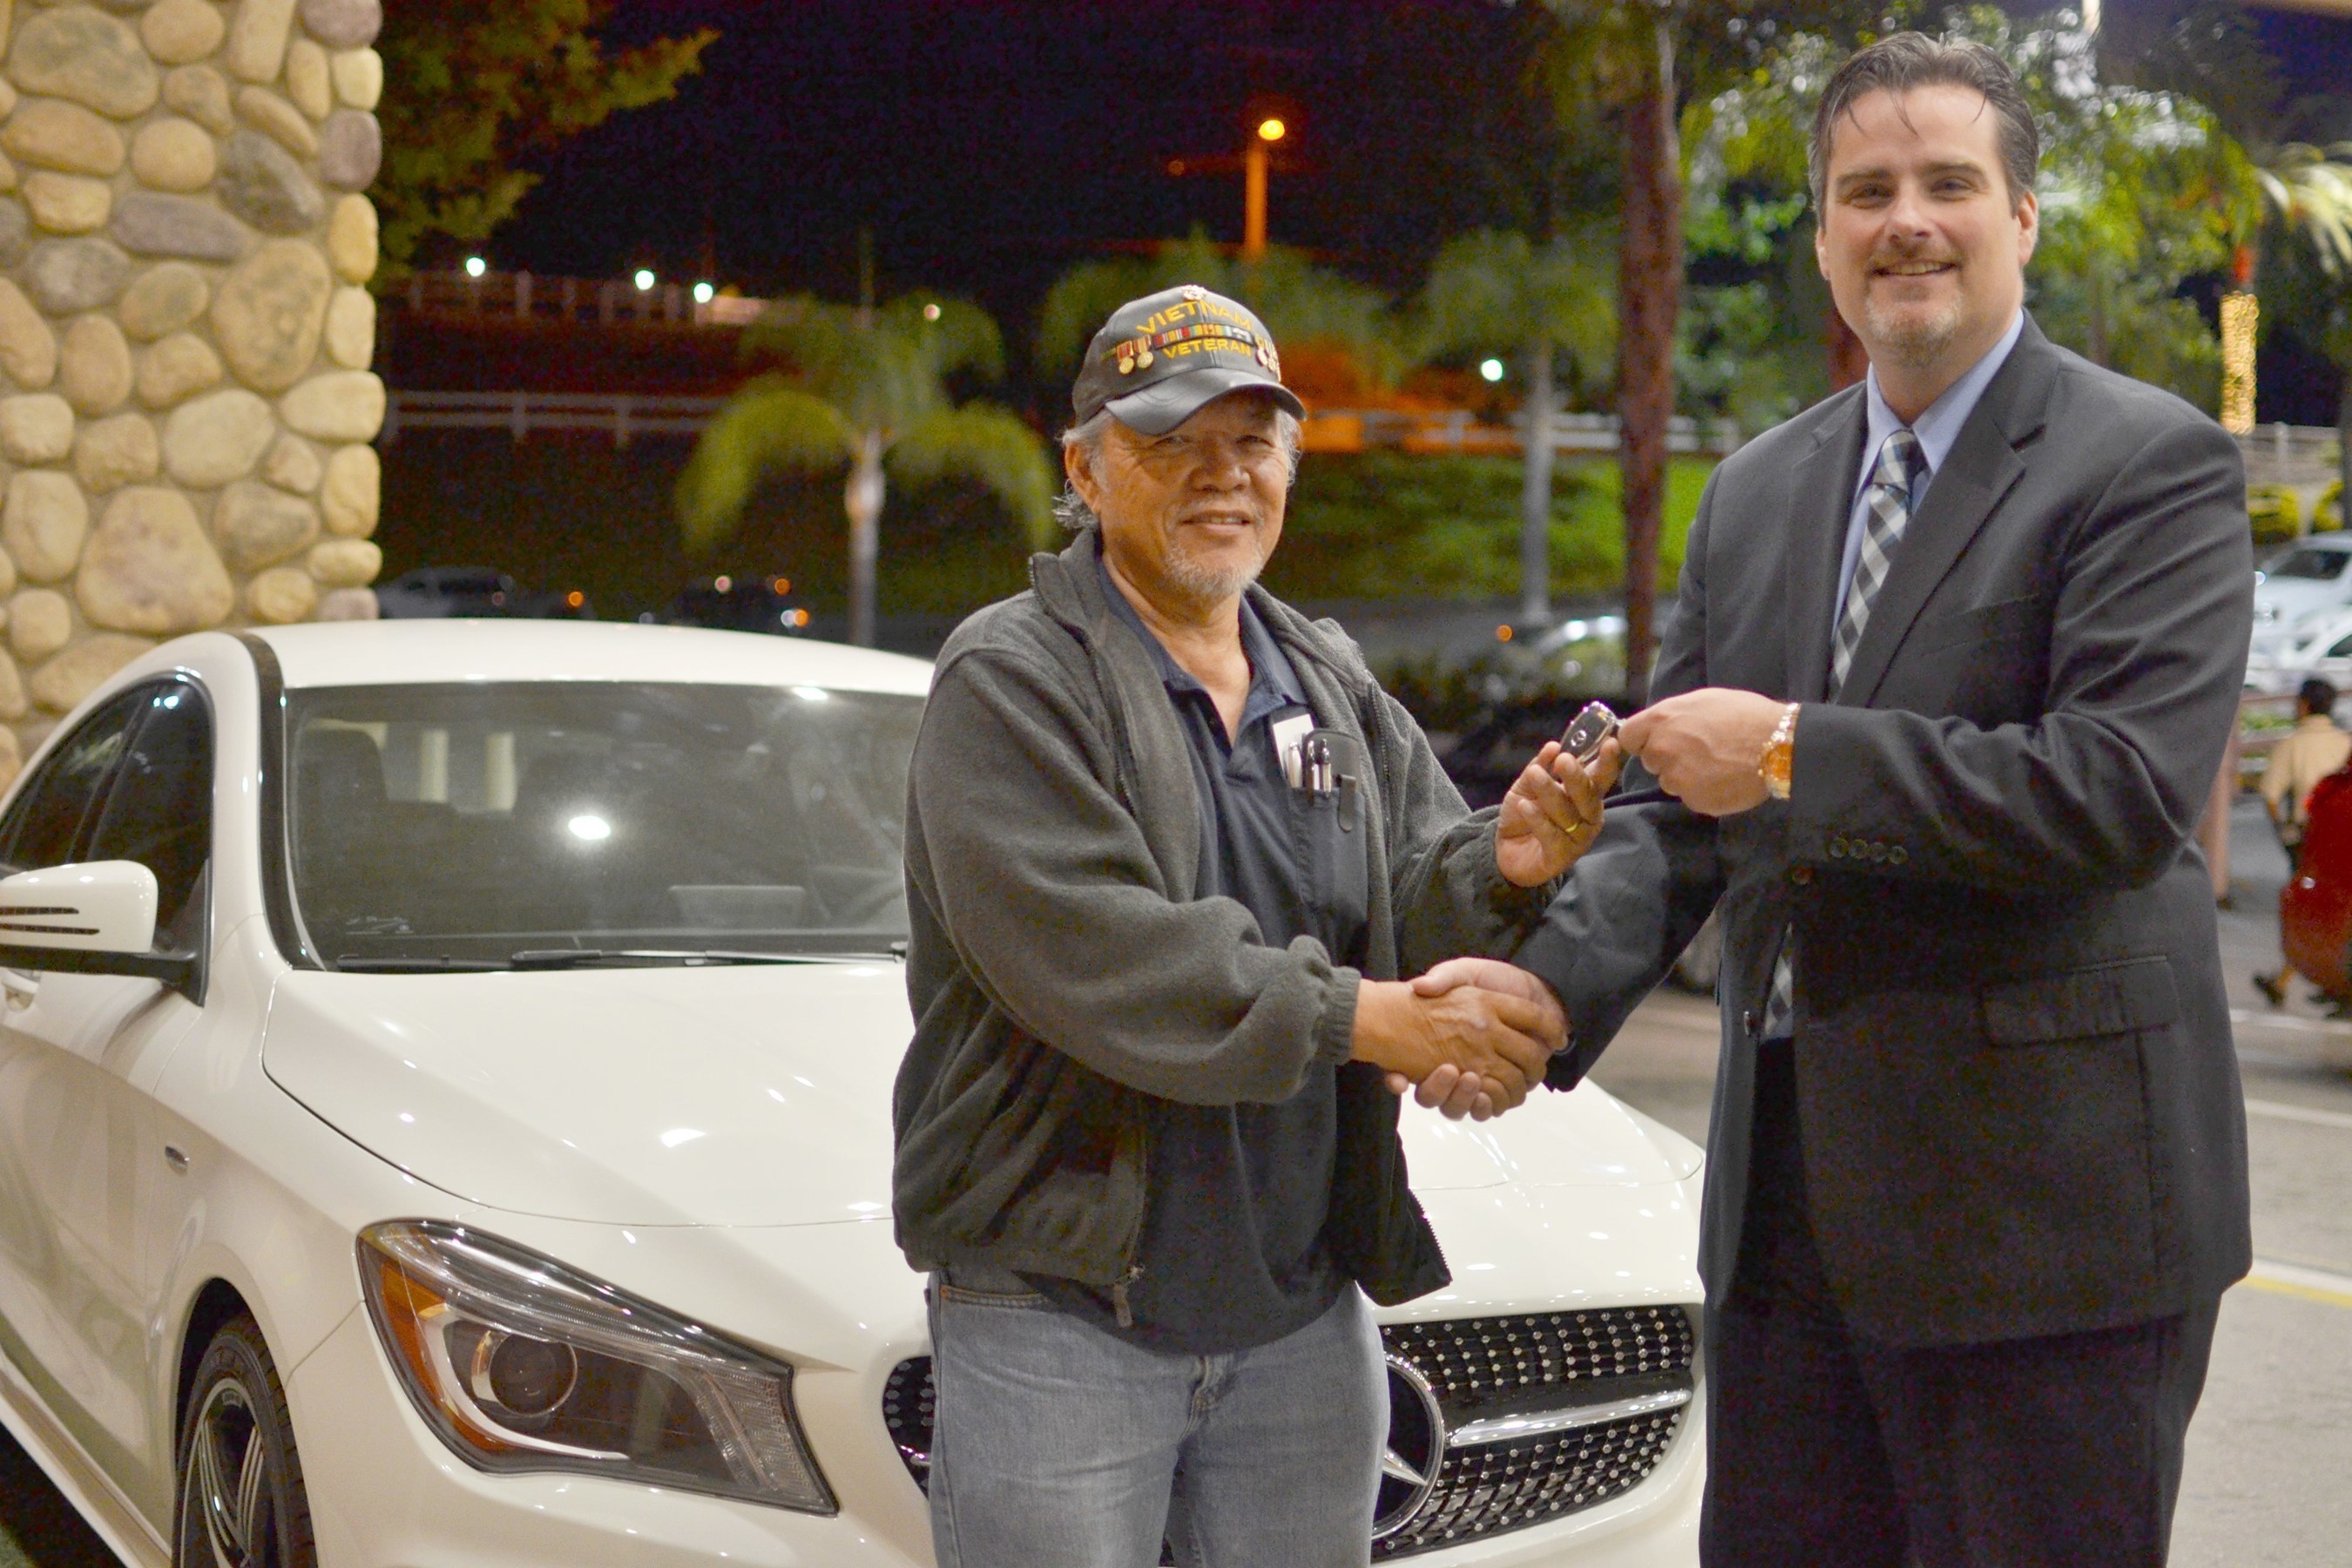 Soboba Casino's Director of Marketing Michael J. Broderick proudly hands the keys of a brand new Mercedes to Vietnam veteran Francis Abergas.